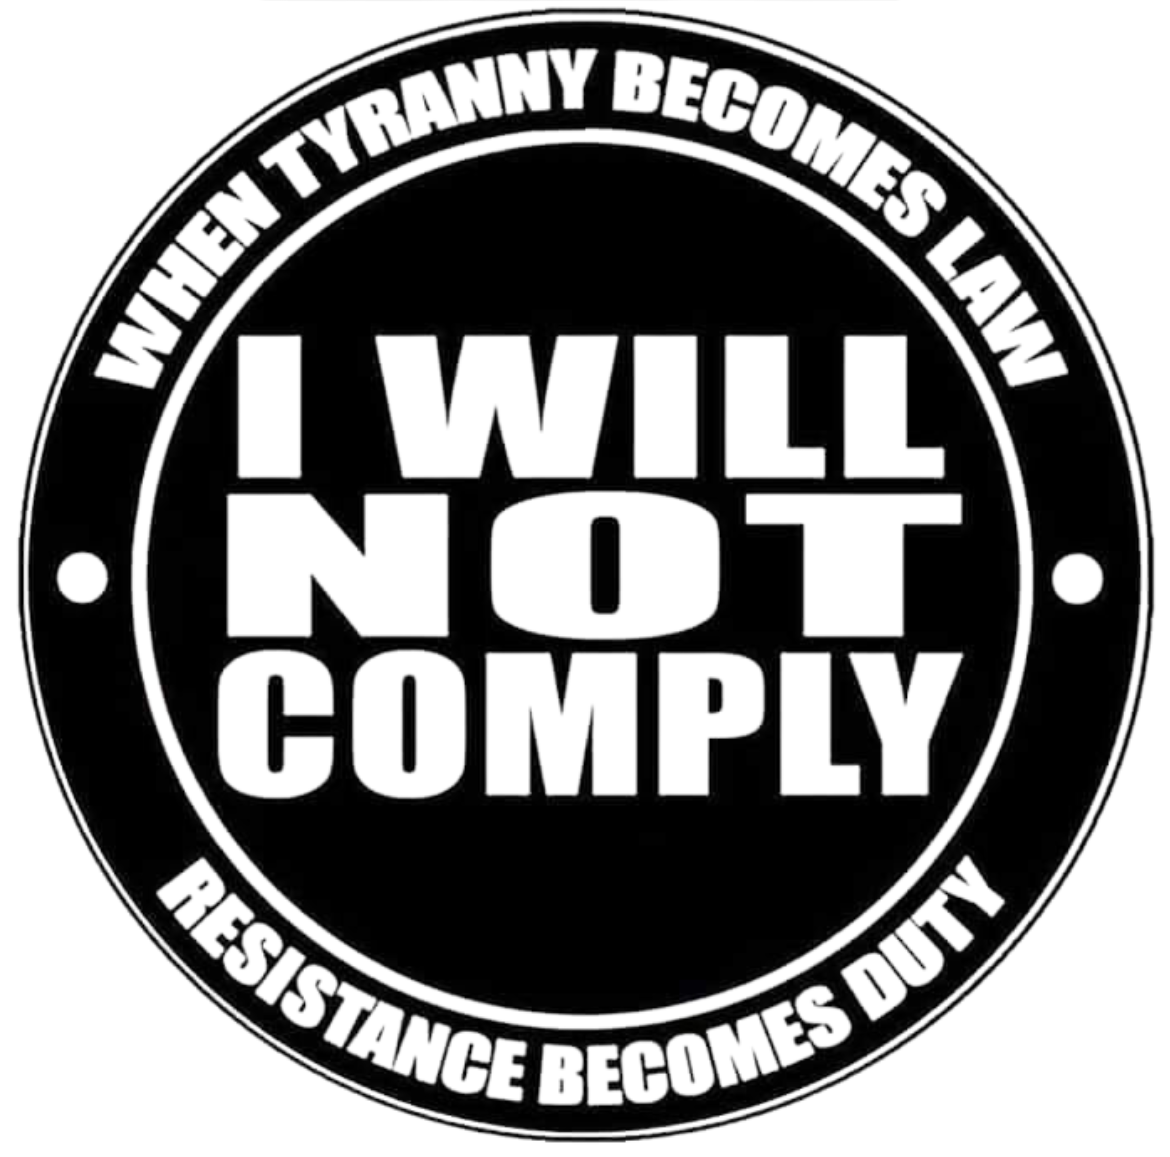 I do not comply